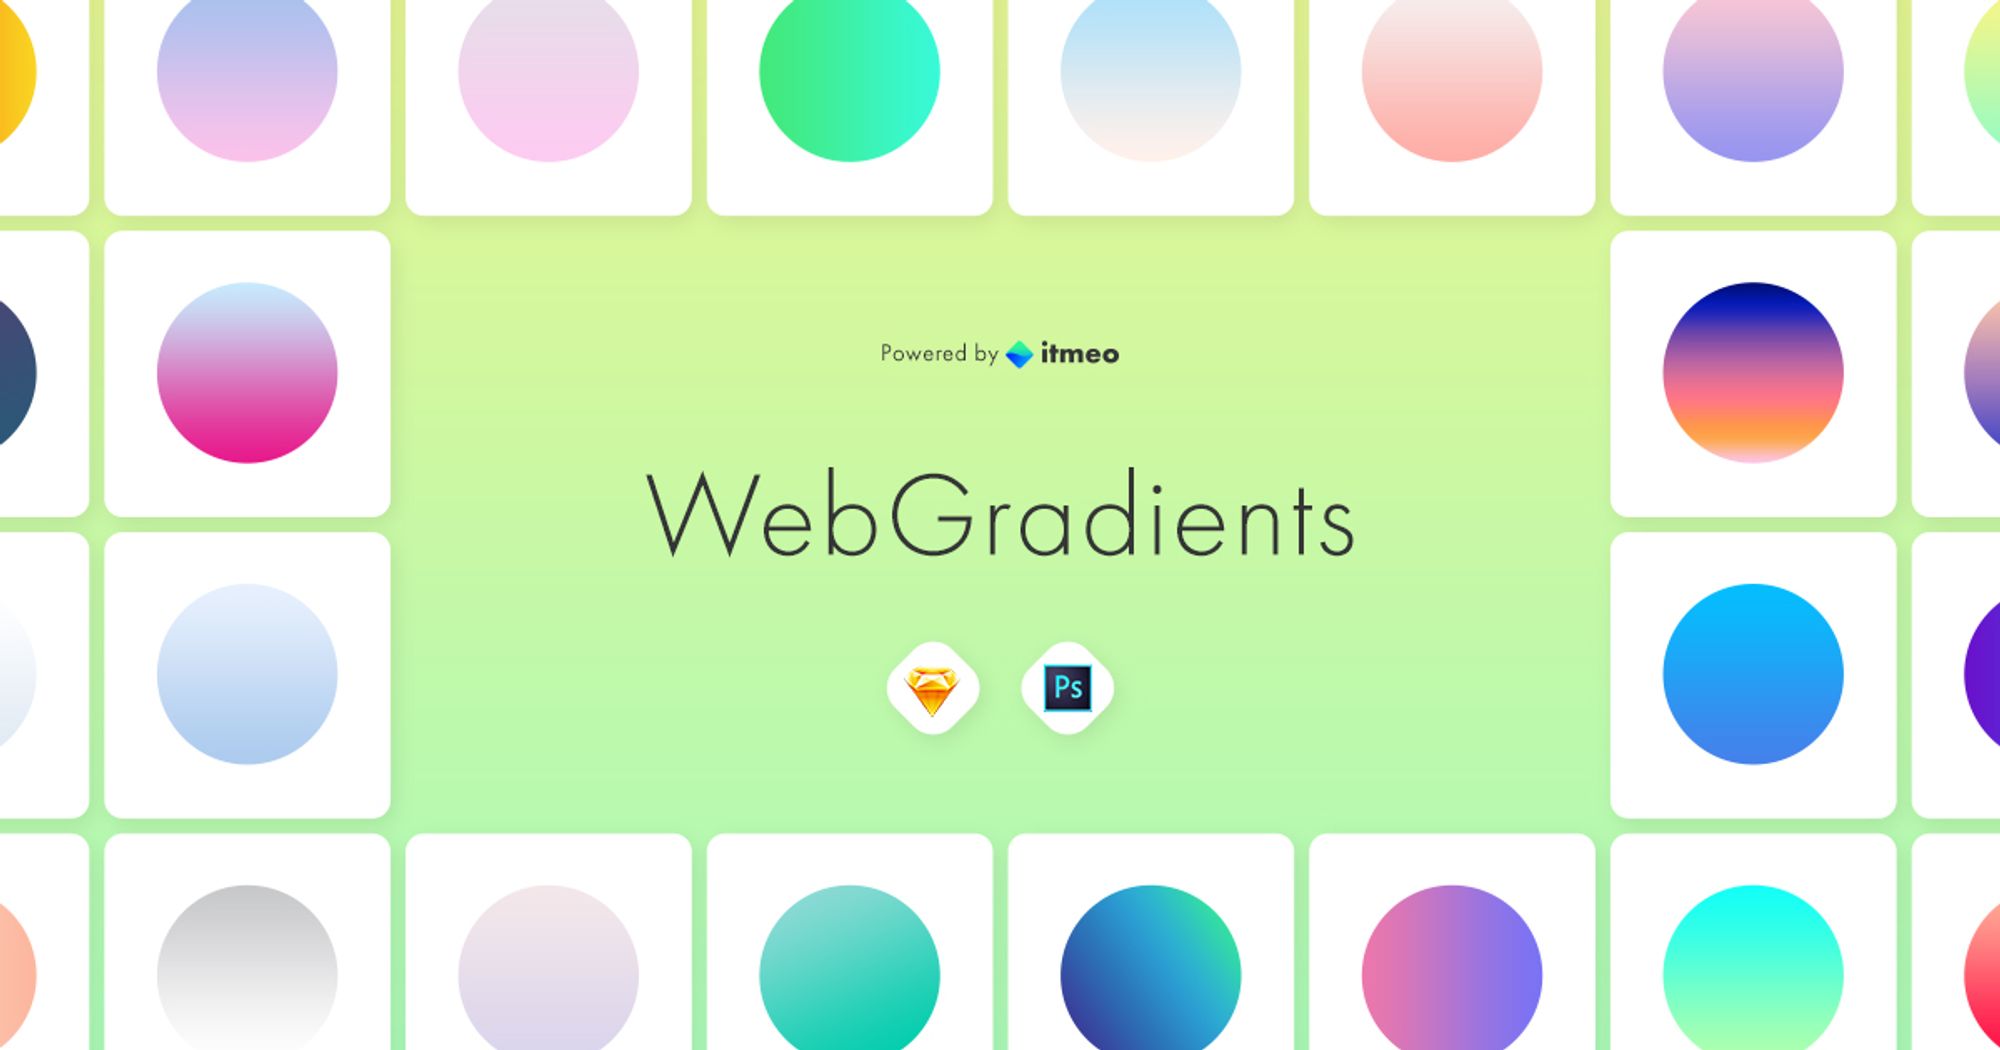 Free Gradients Collection by itmeo.com